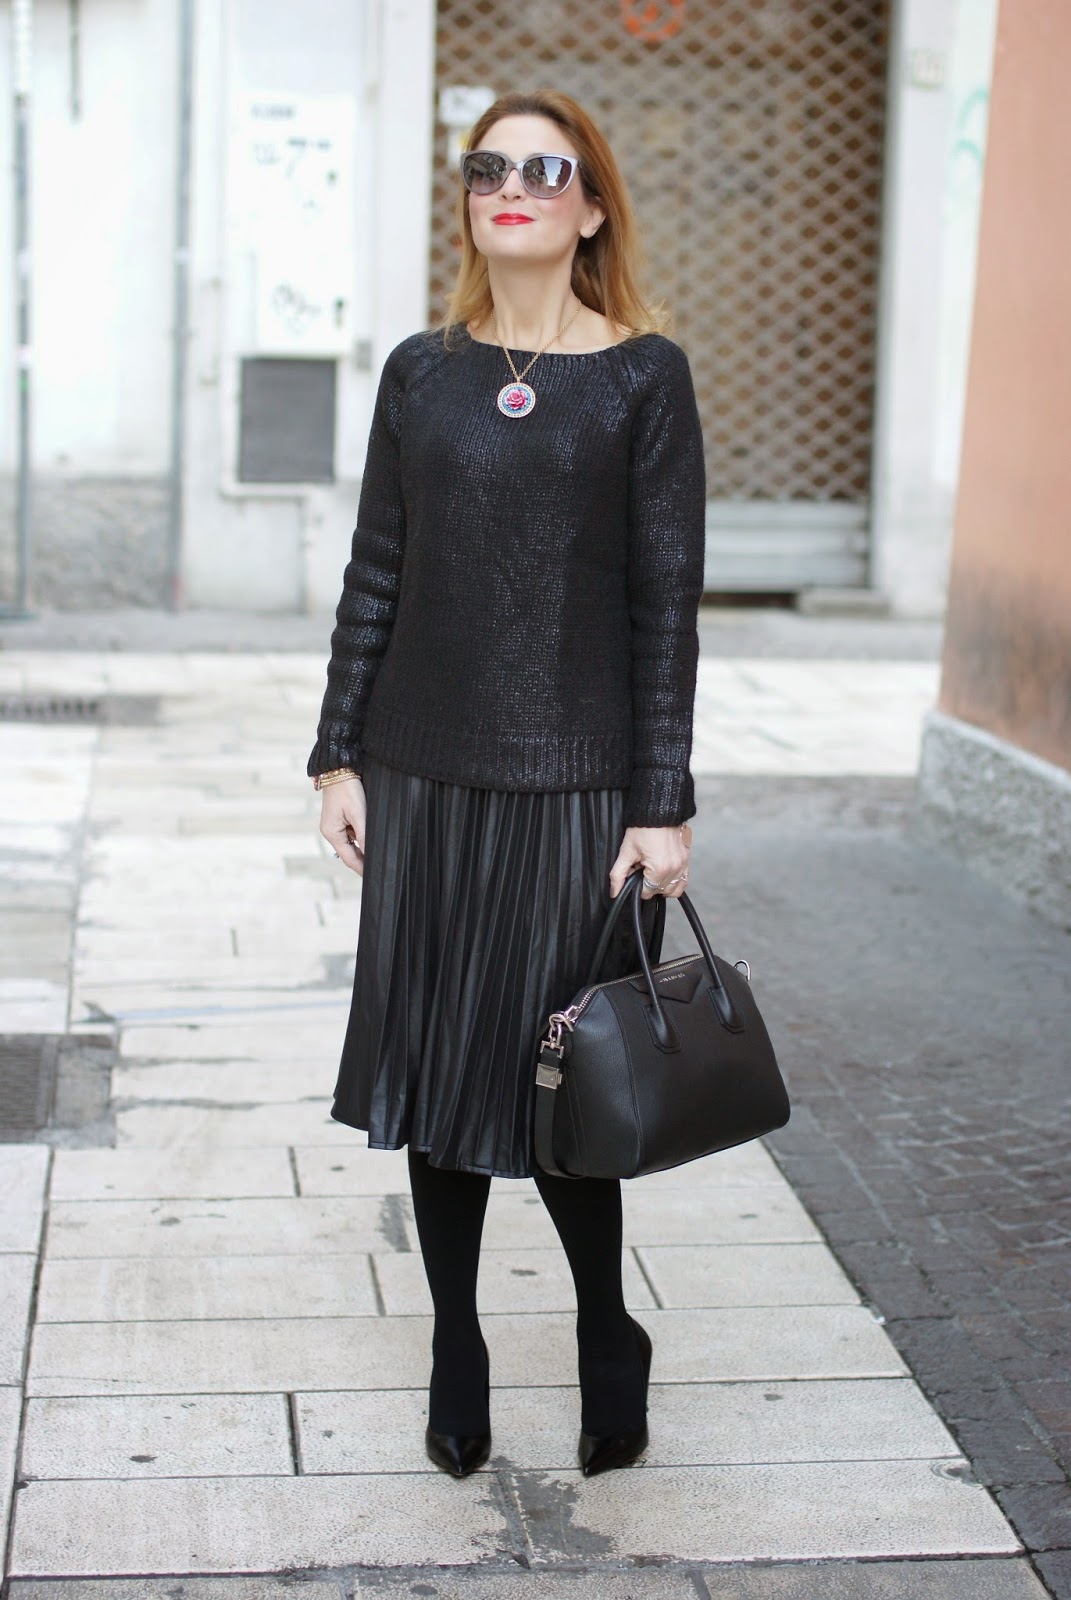 Almost all black: faux leather pleated midi skirt | Fashion and ...